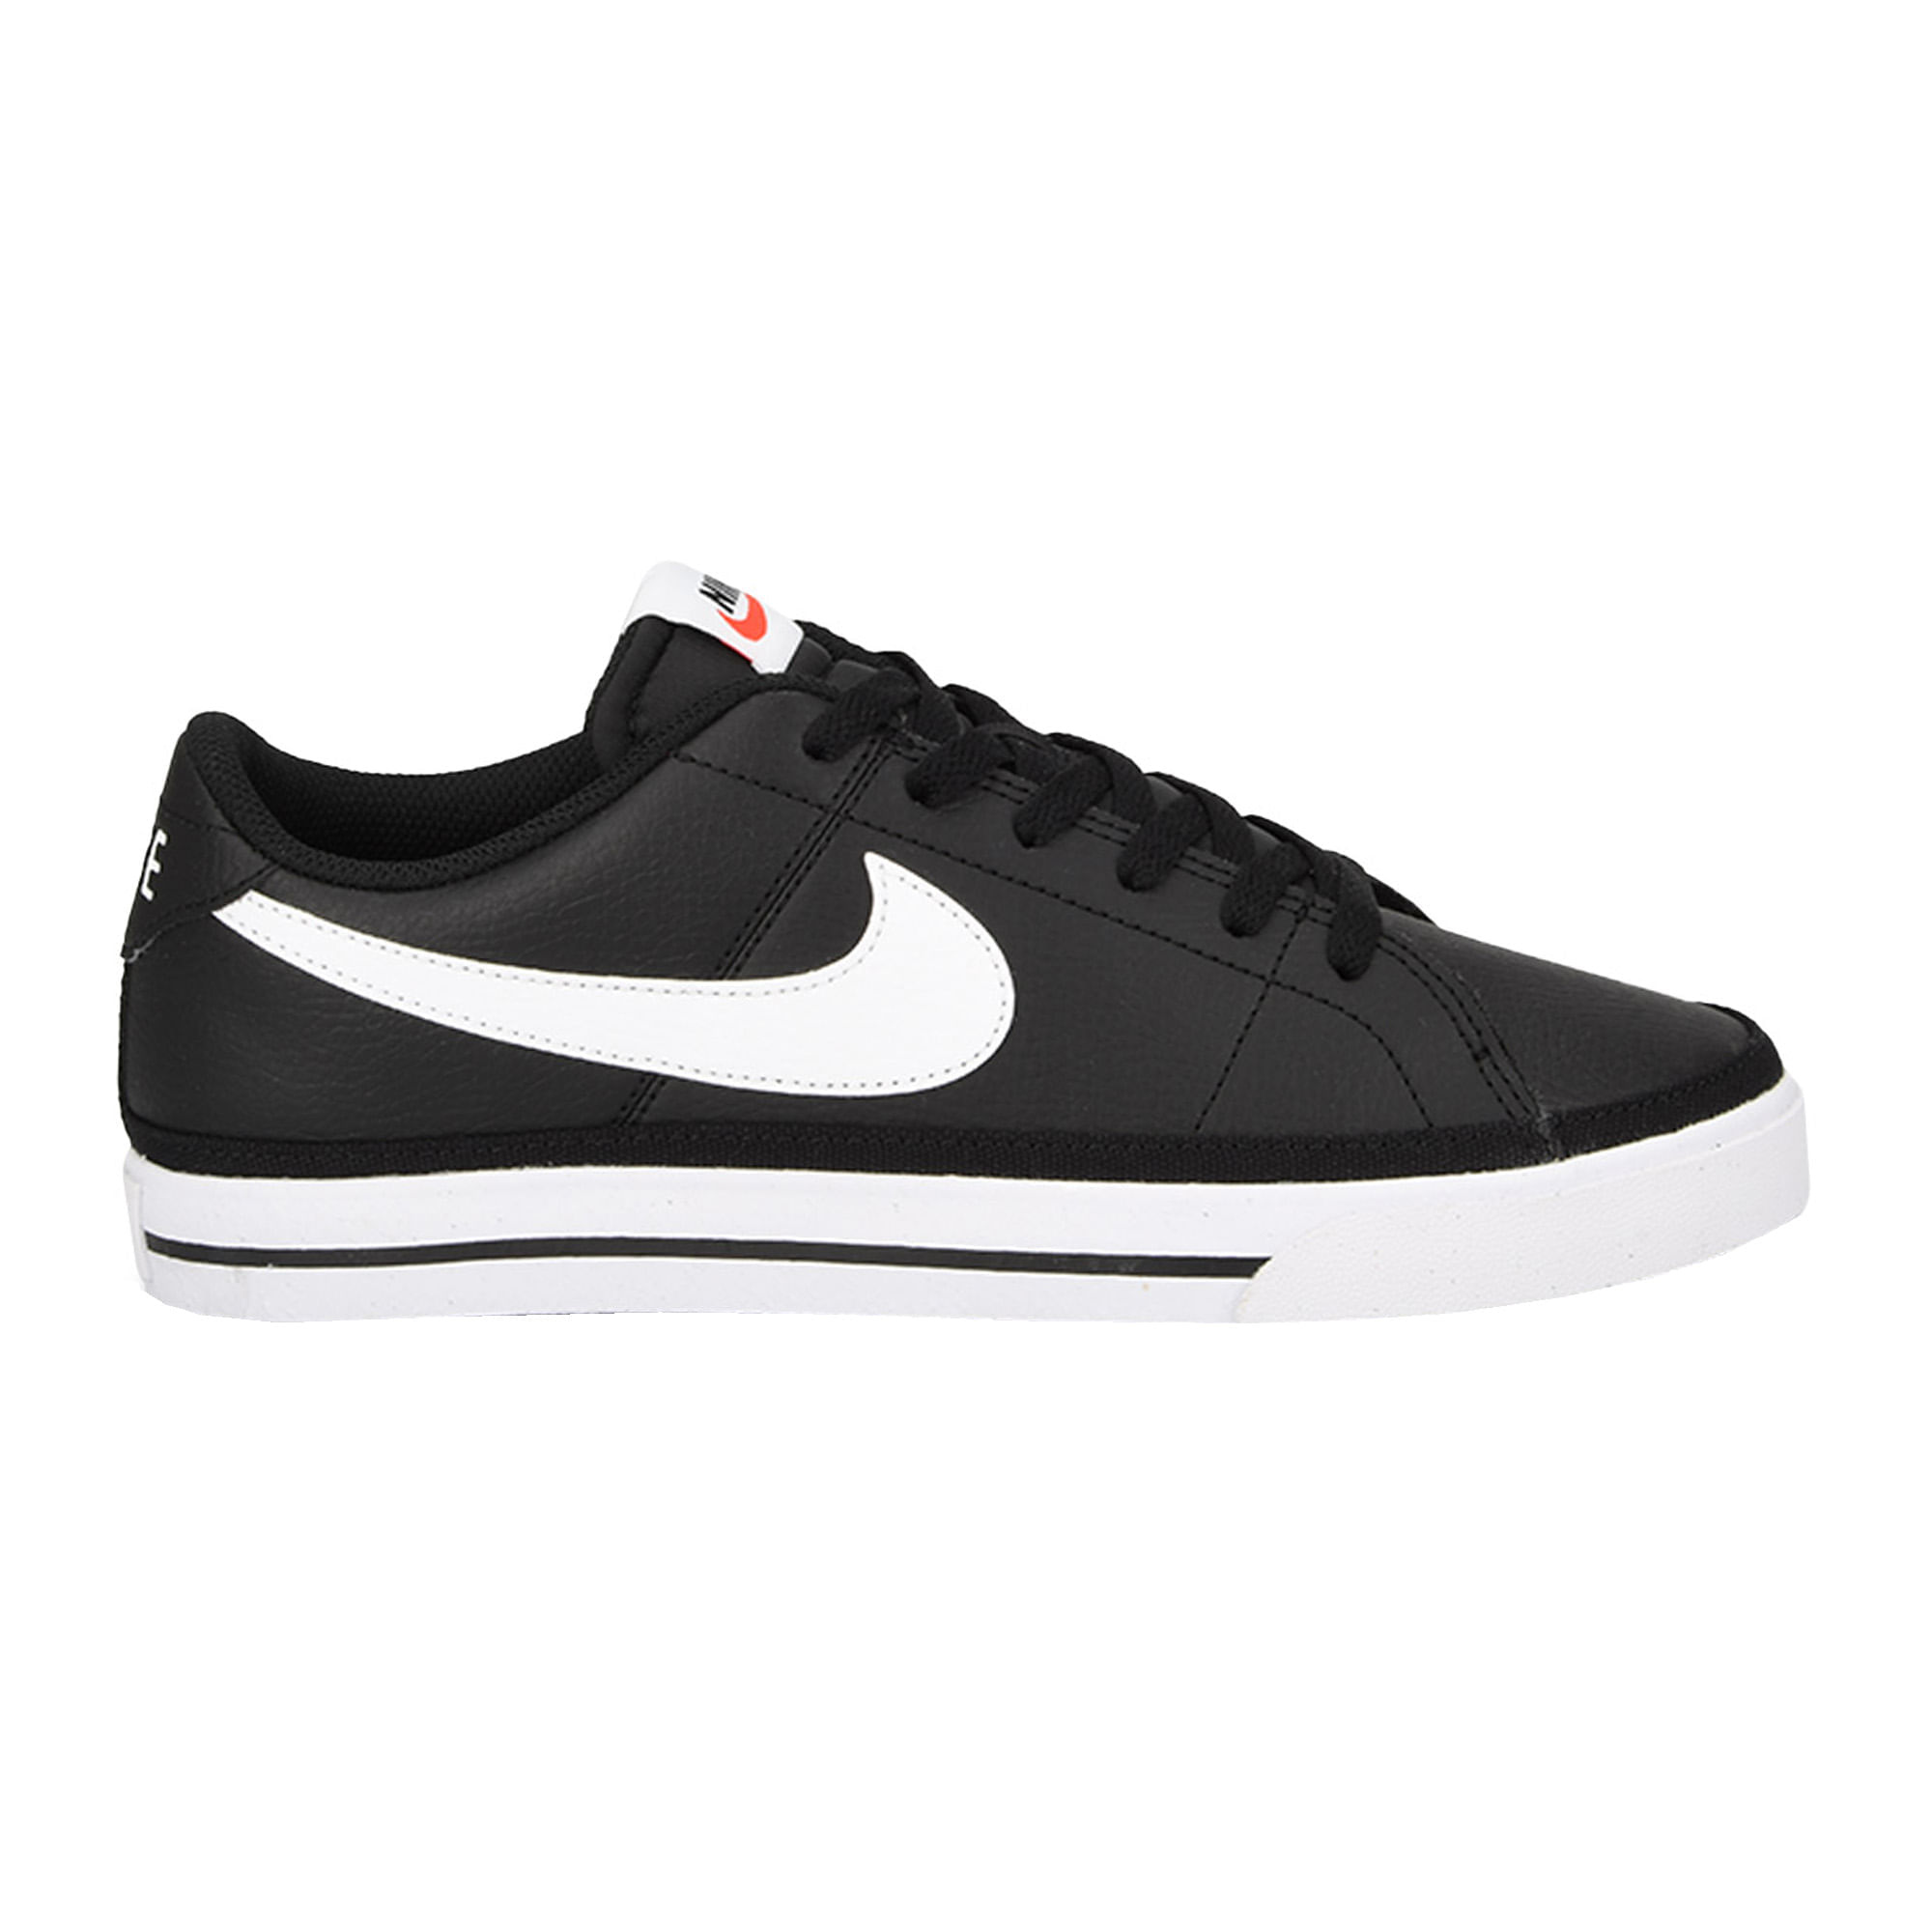 Zapato Nike Dh3162-001 - peopleplays